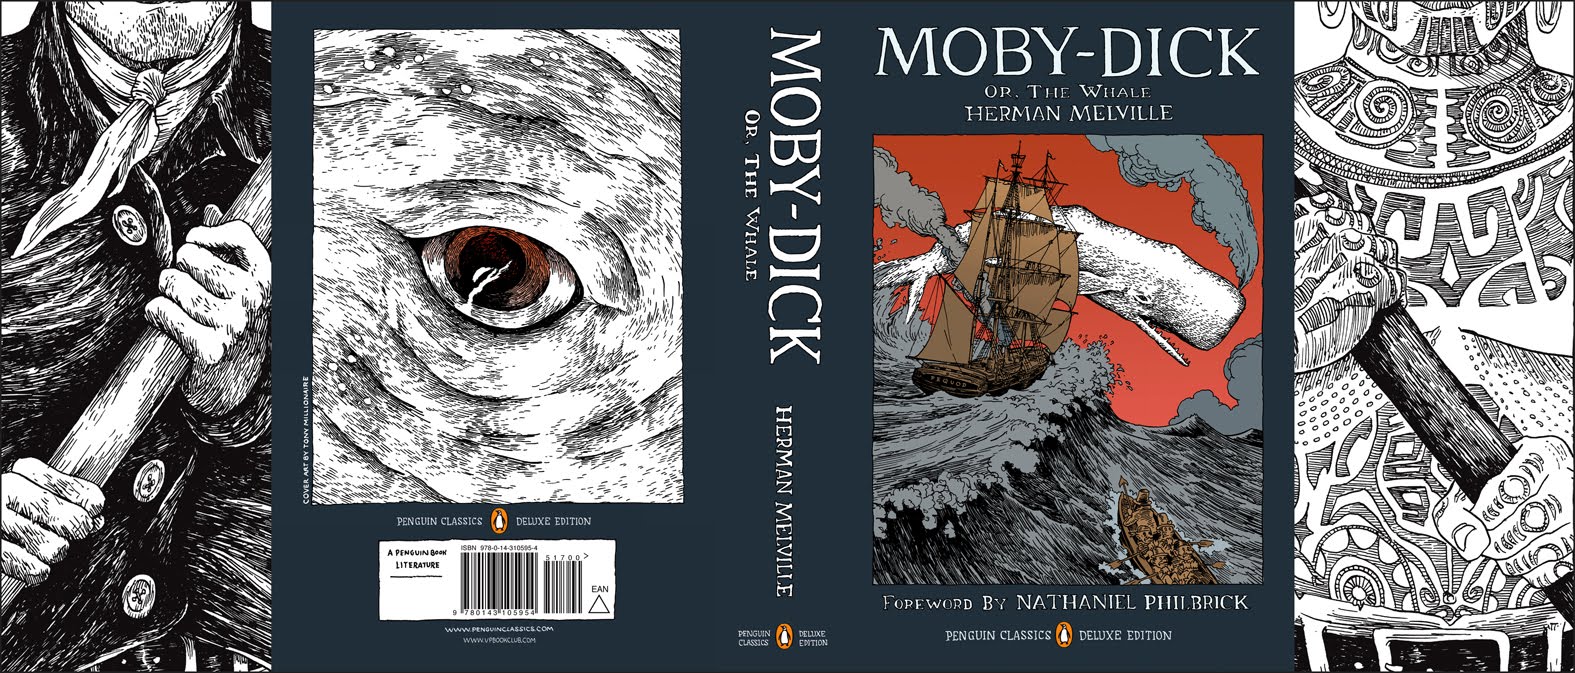 Centenial penguin edition moby dick